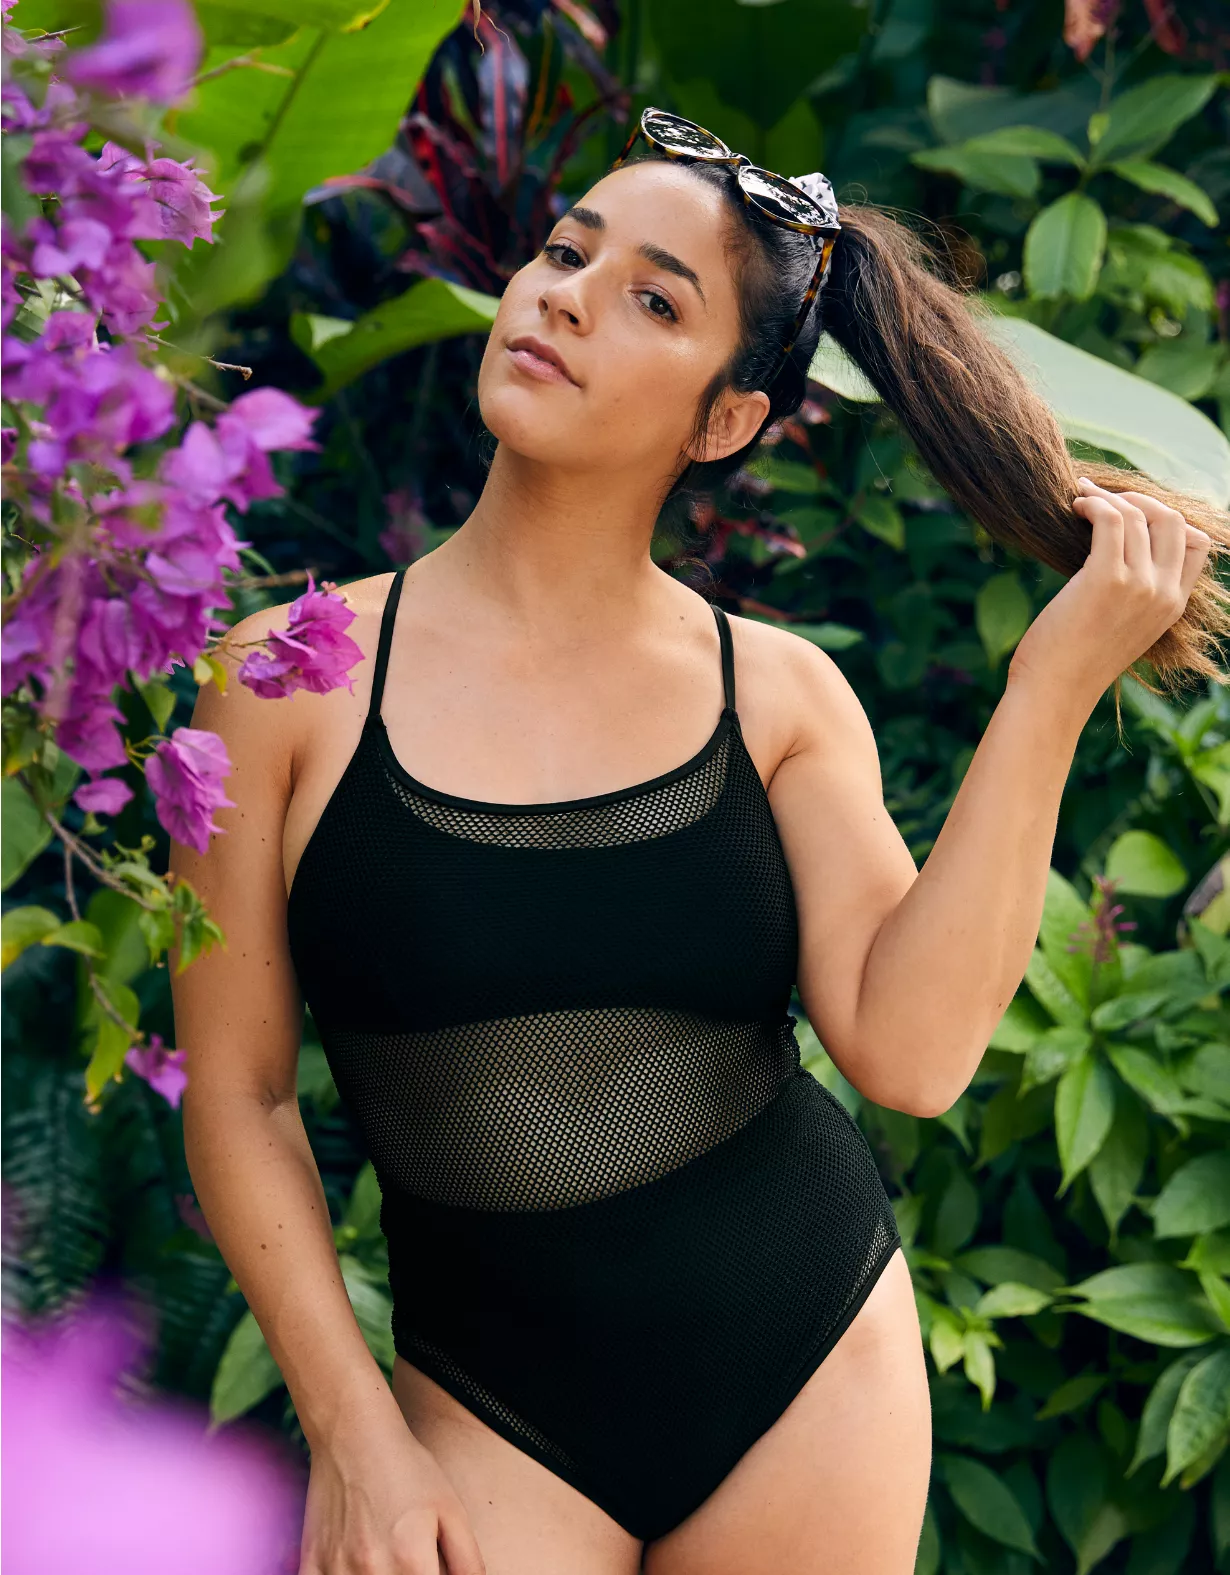 Aerie Mesh One Piece Swimsuit